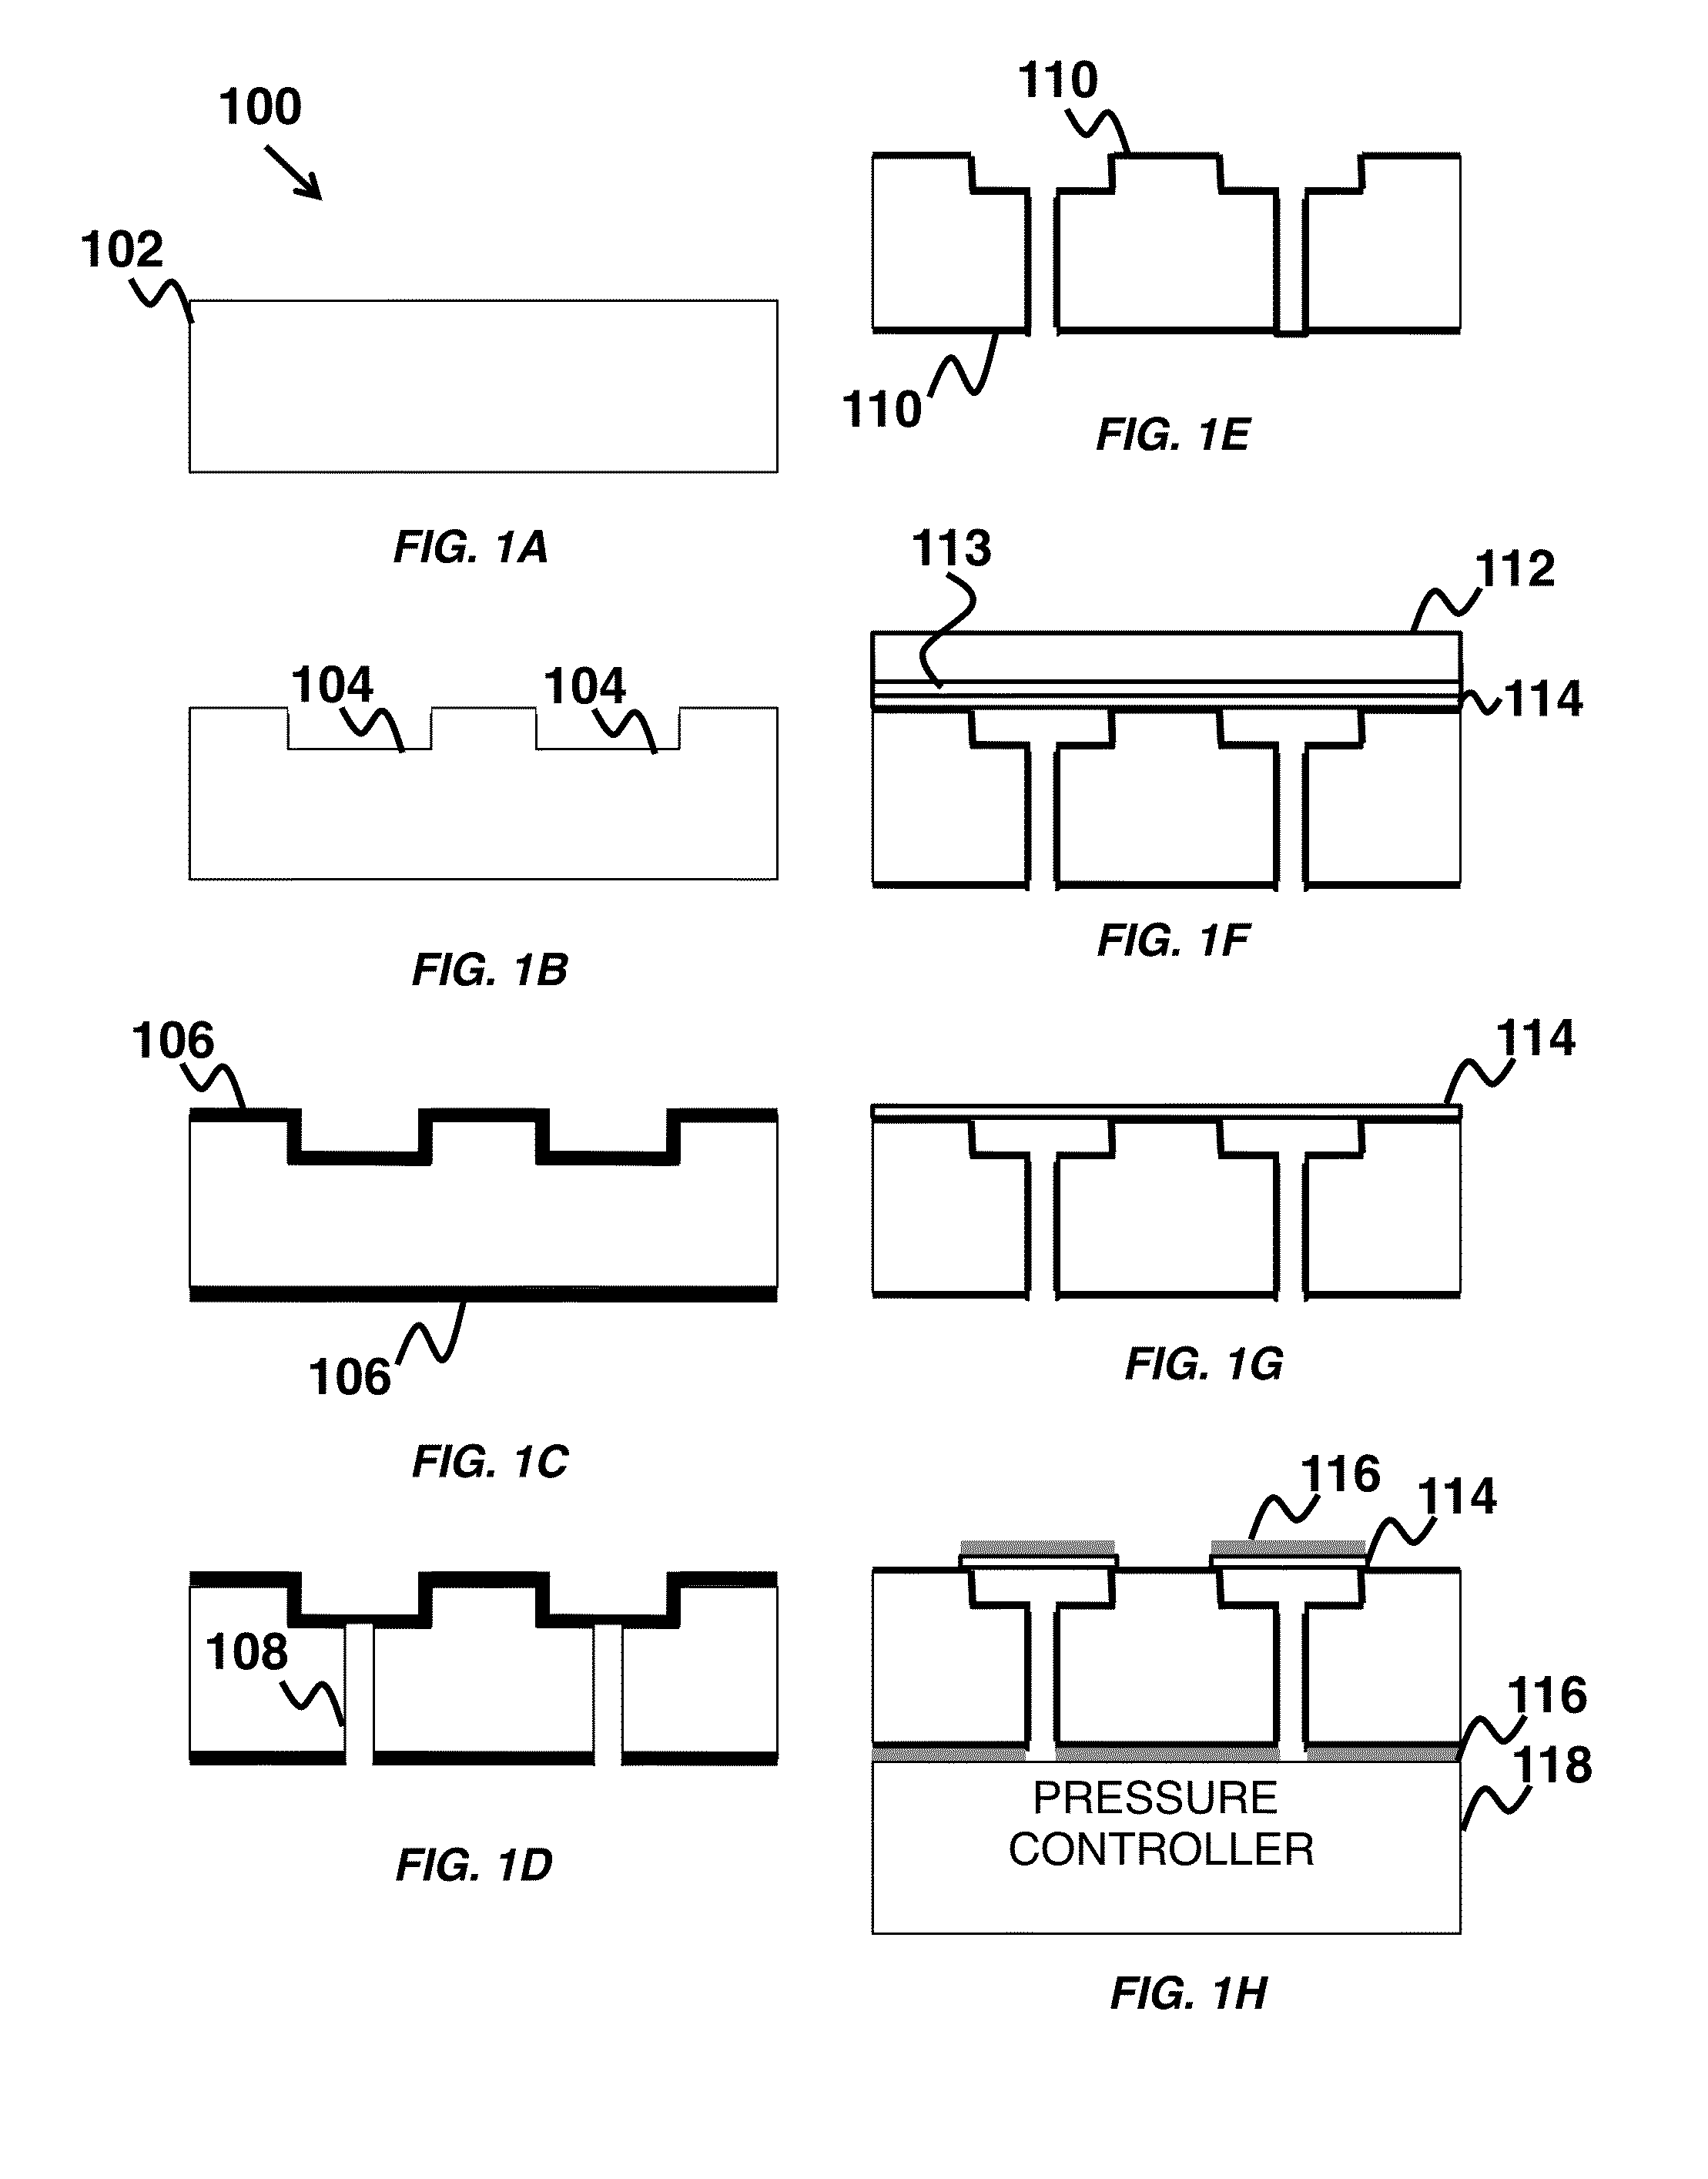 Ultrasonic sensor for object and movement detection